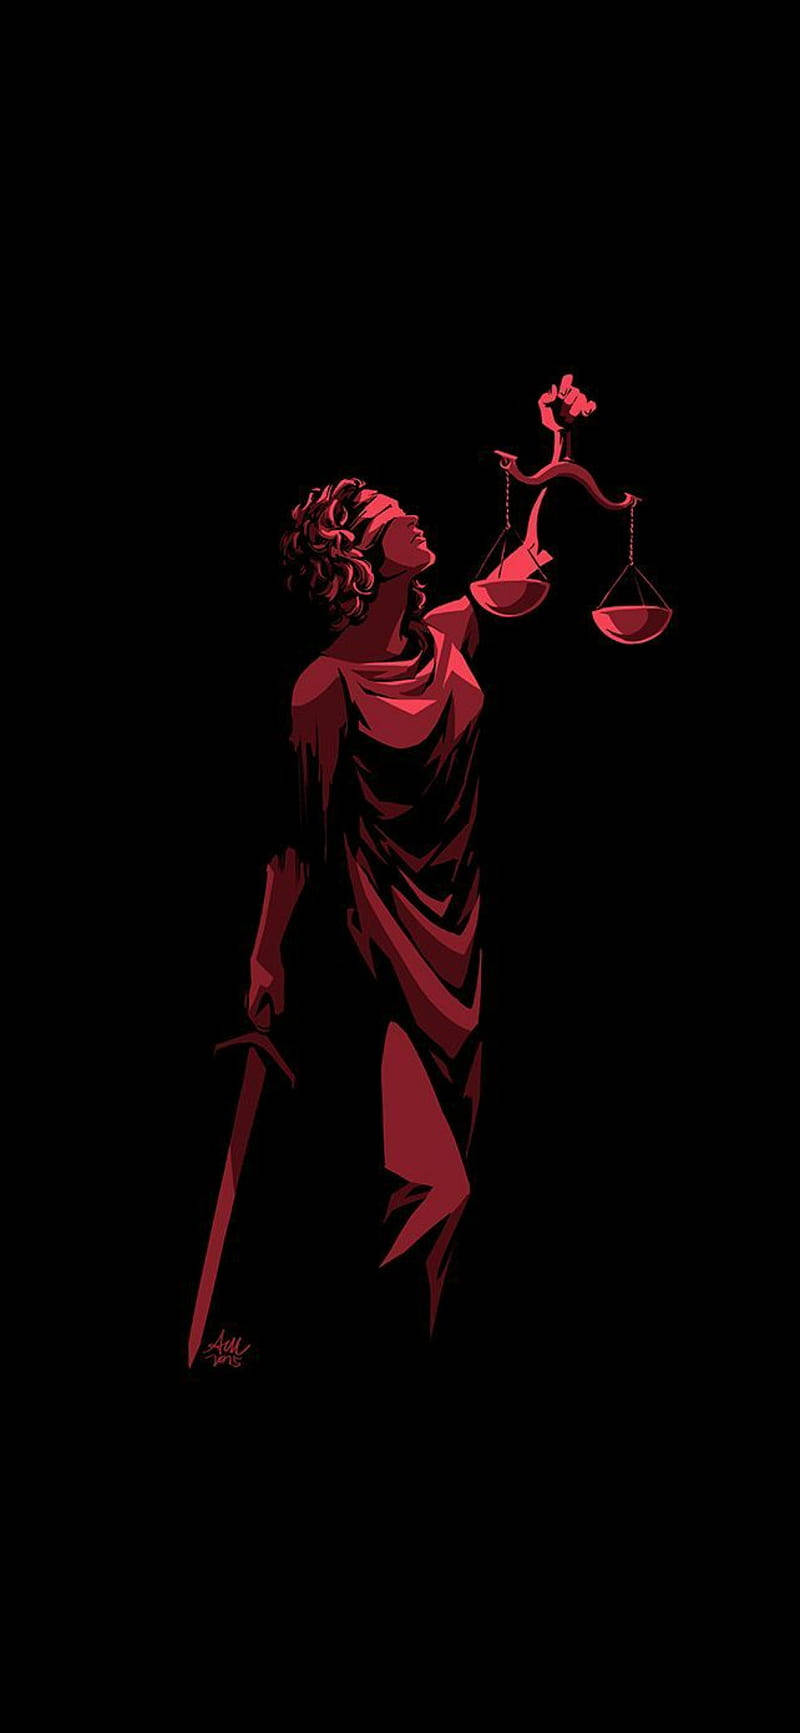 Lady Justice Black And Red Digital Art Background